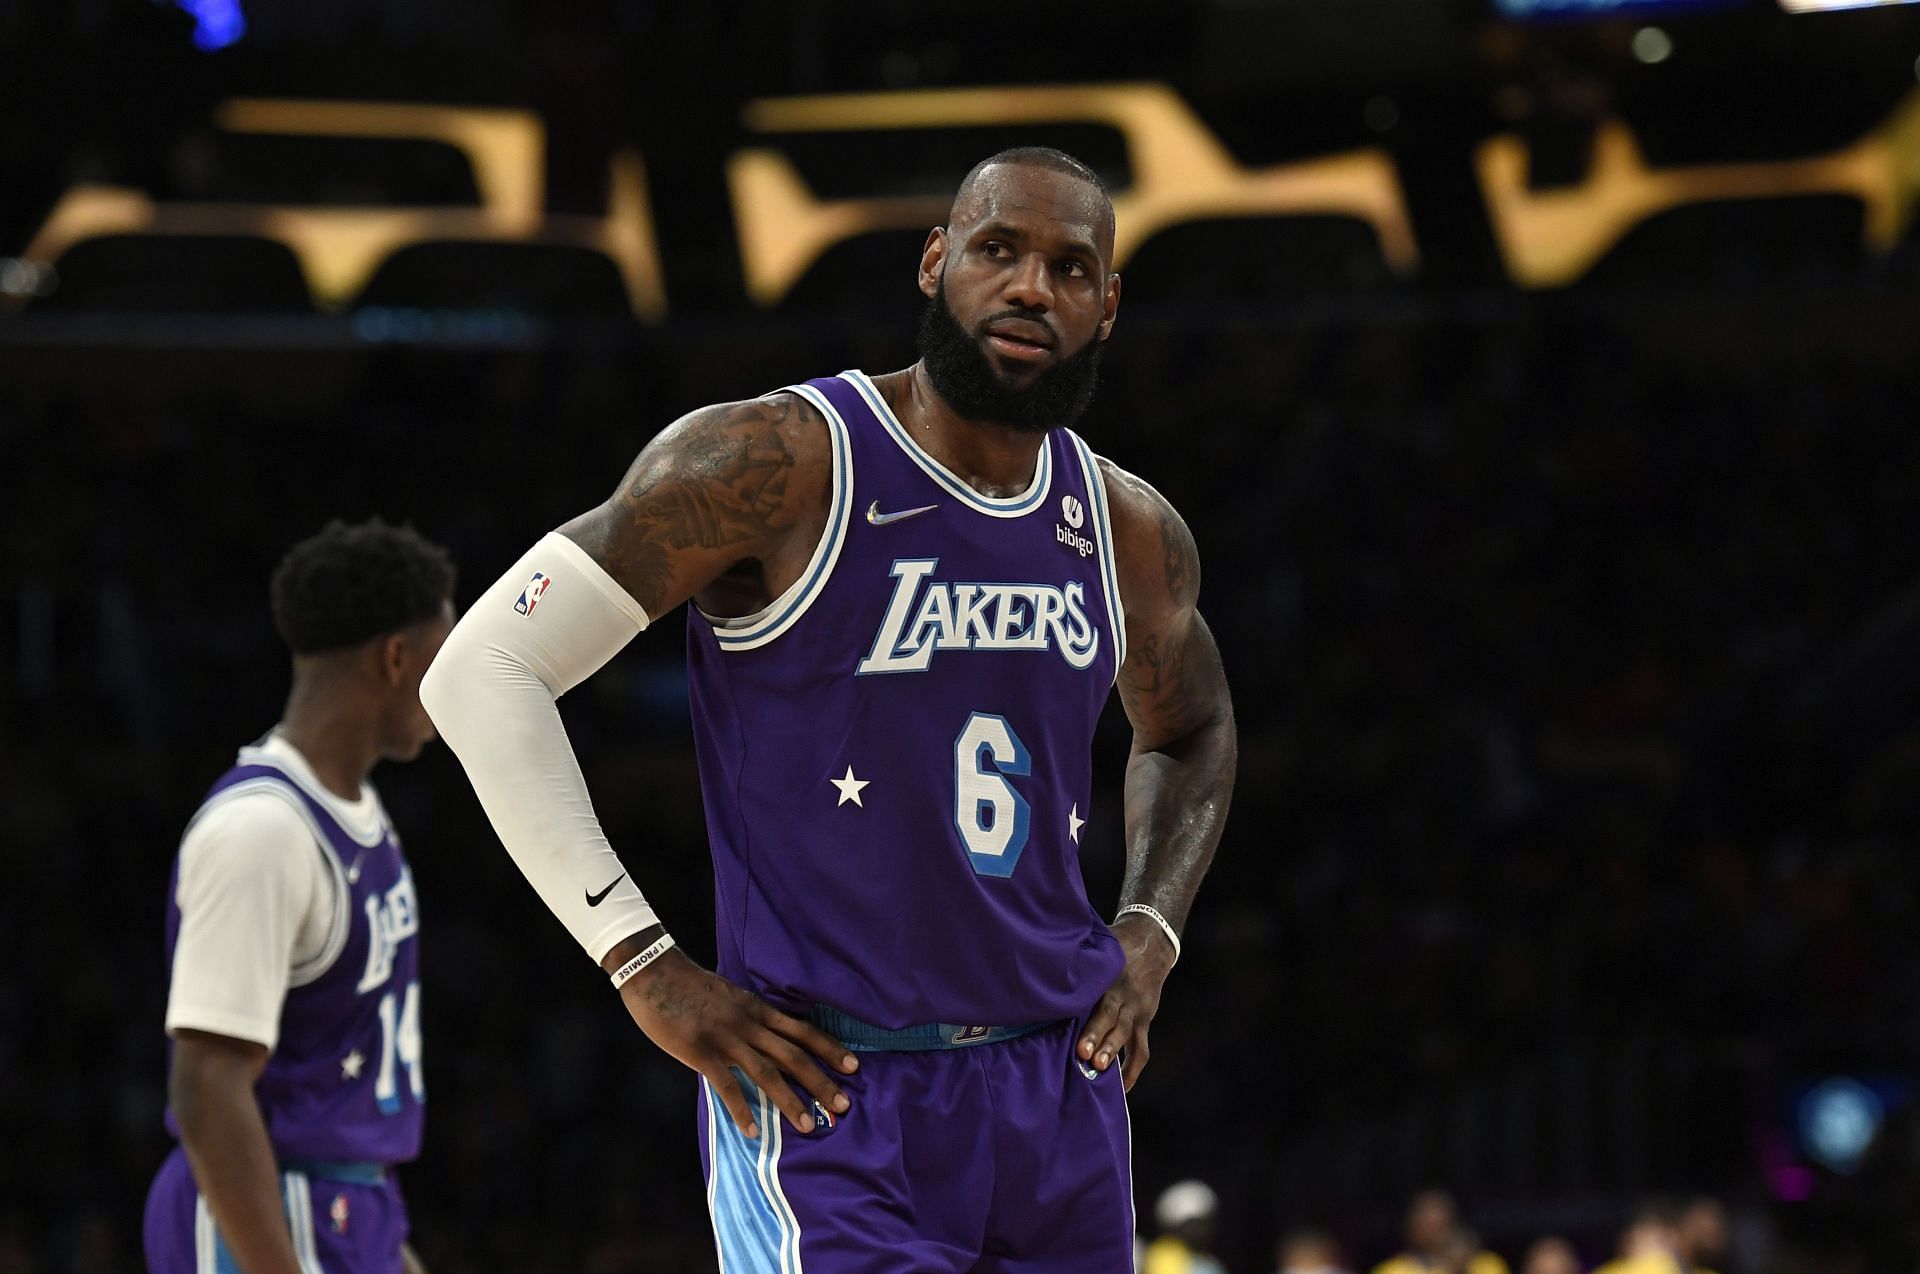 LeBron James and his Lakers will have a tough road ahead of themselves (Image via Getty Images)